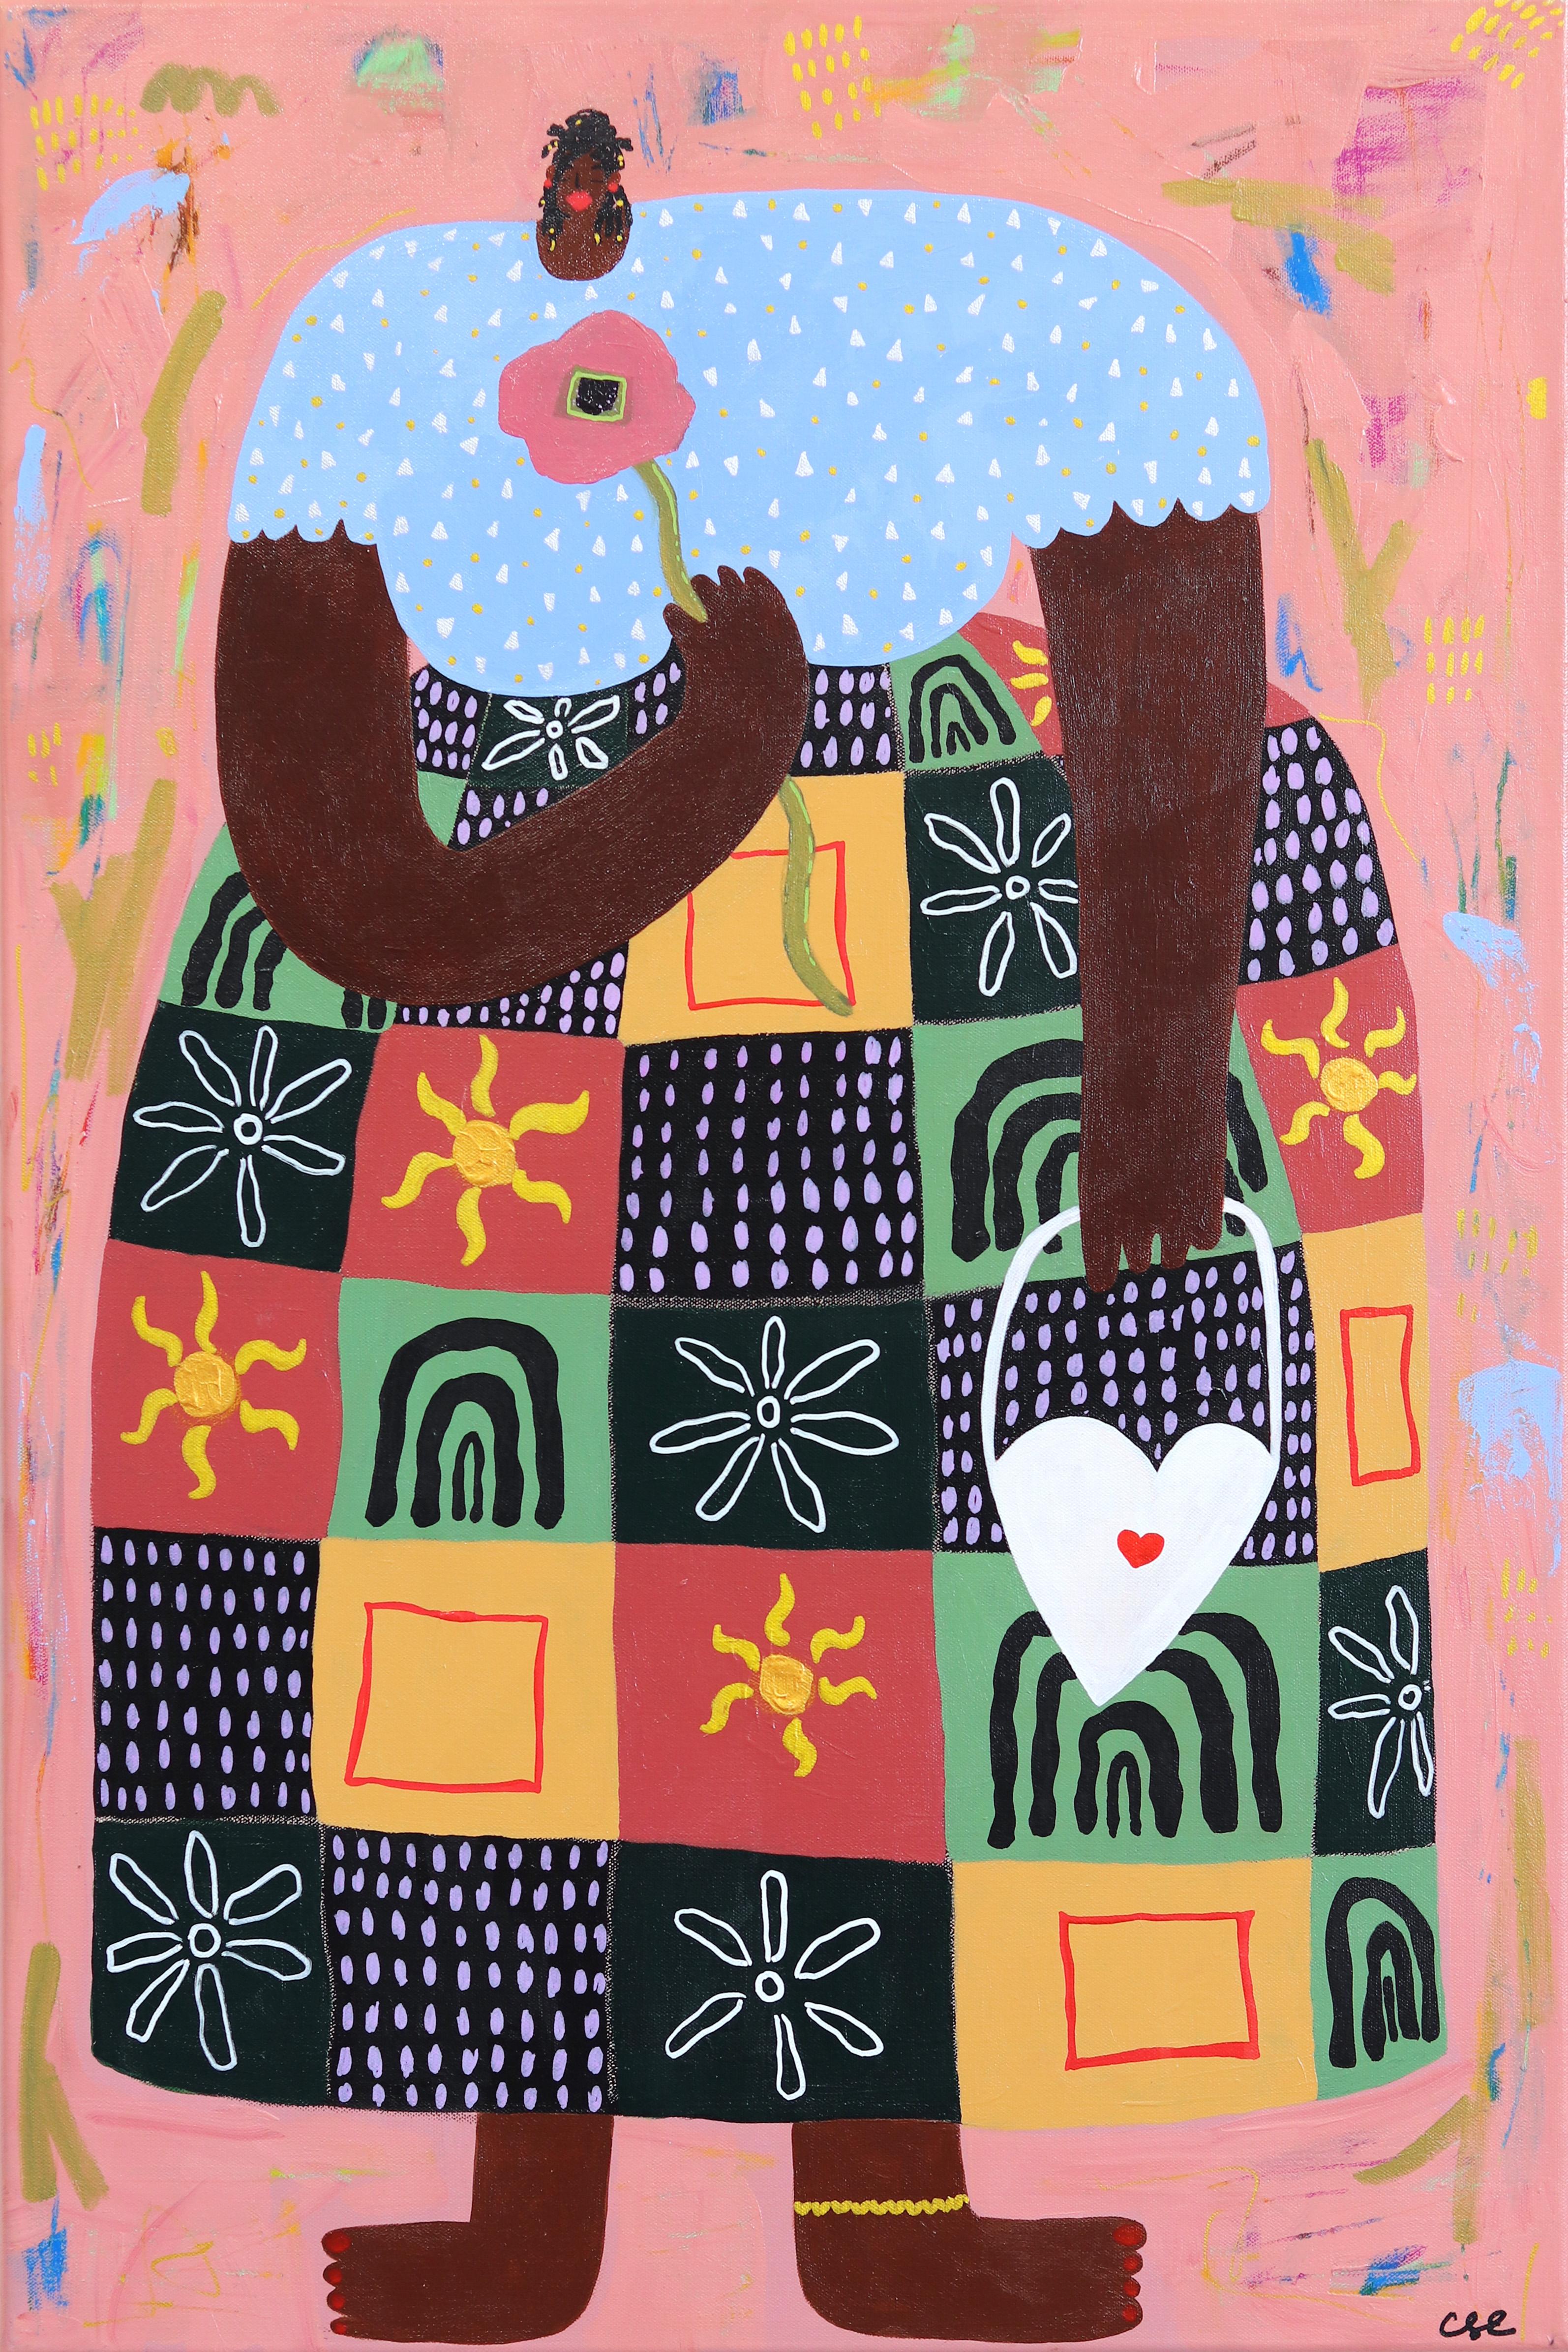 Patterned Elegance - Cheerful Figurative Painting - Mixed Media Art by Courtney Simone